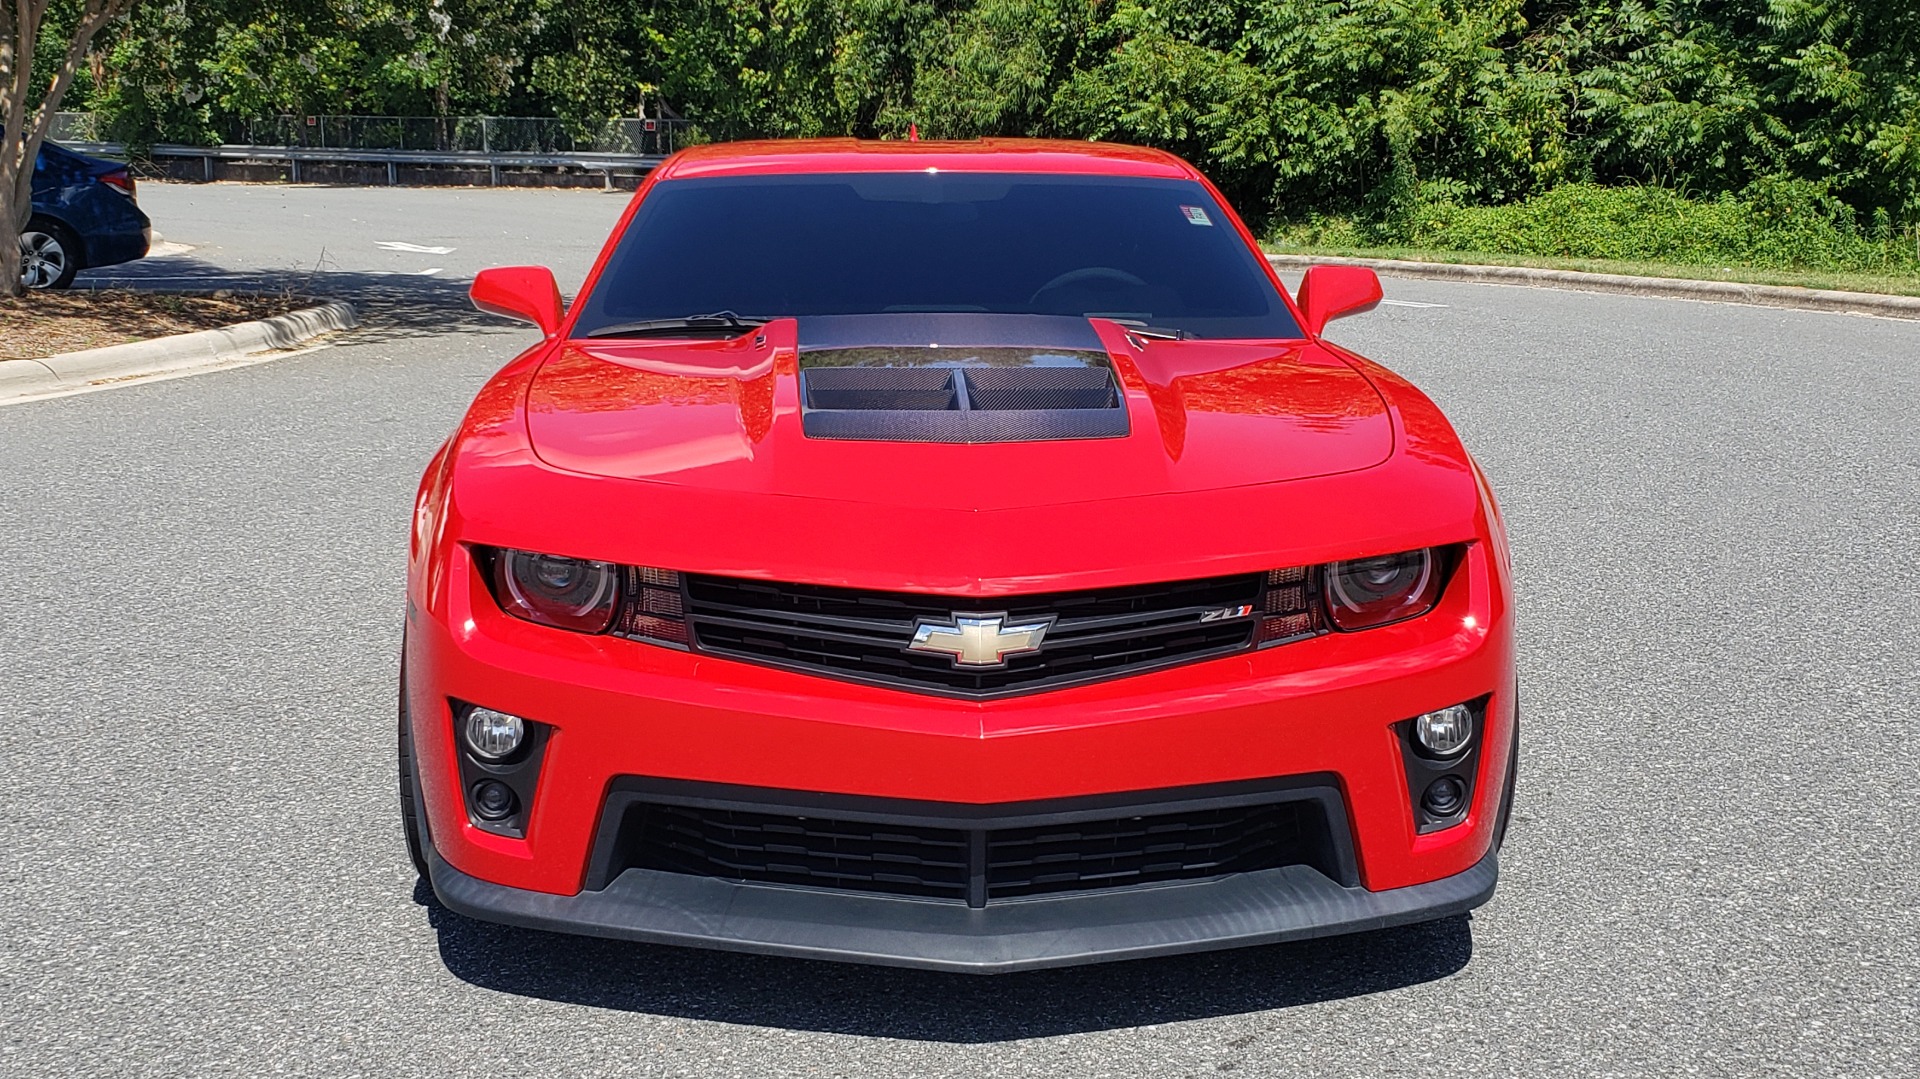 Used 2013 Chevrolet CAMARO ZL1 / 6.2L SUPERCHARGED 580HP / 6-SPD AUTO / NAV / REARVIEW for sale Sold at Formula Imports in Charlotte NC 28227 31